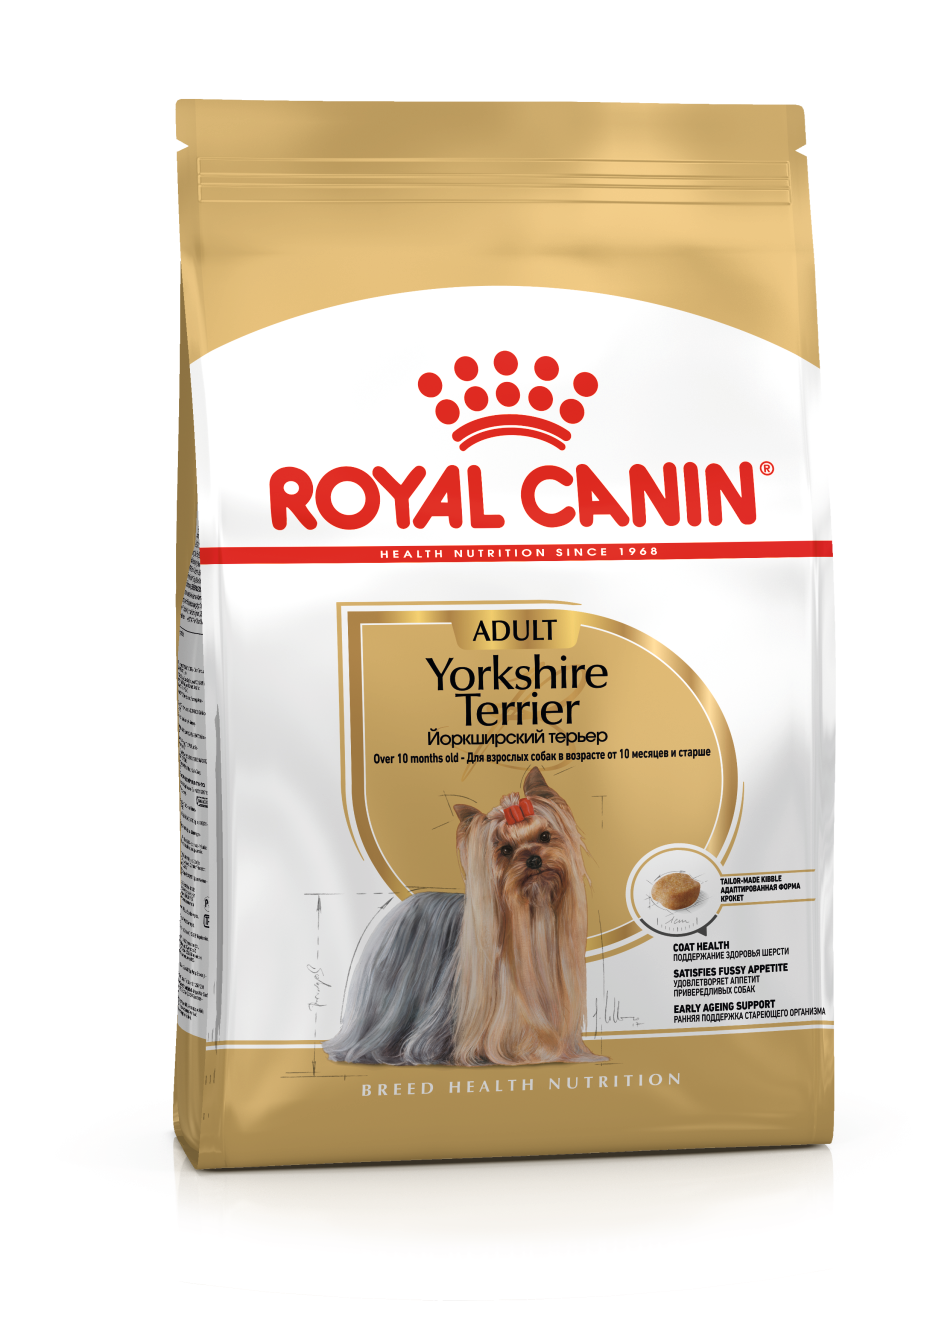 ROYAL CANIN Yorkshire Terrier Adult Dog Food